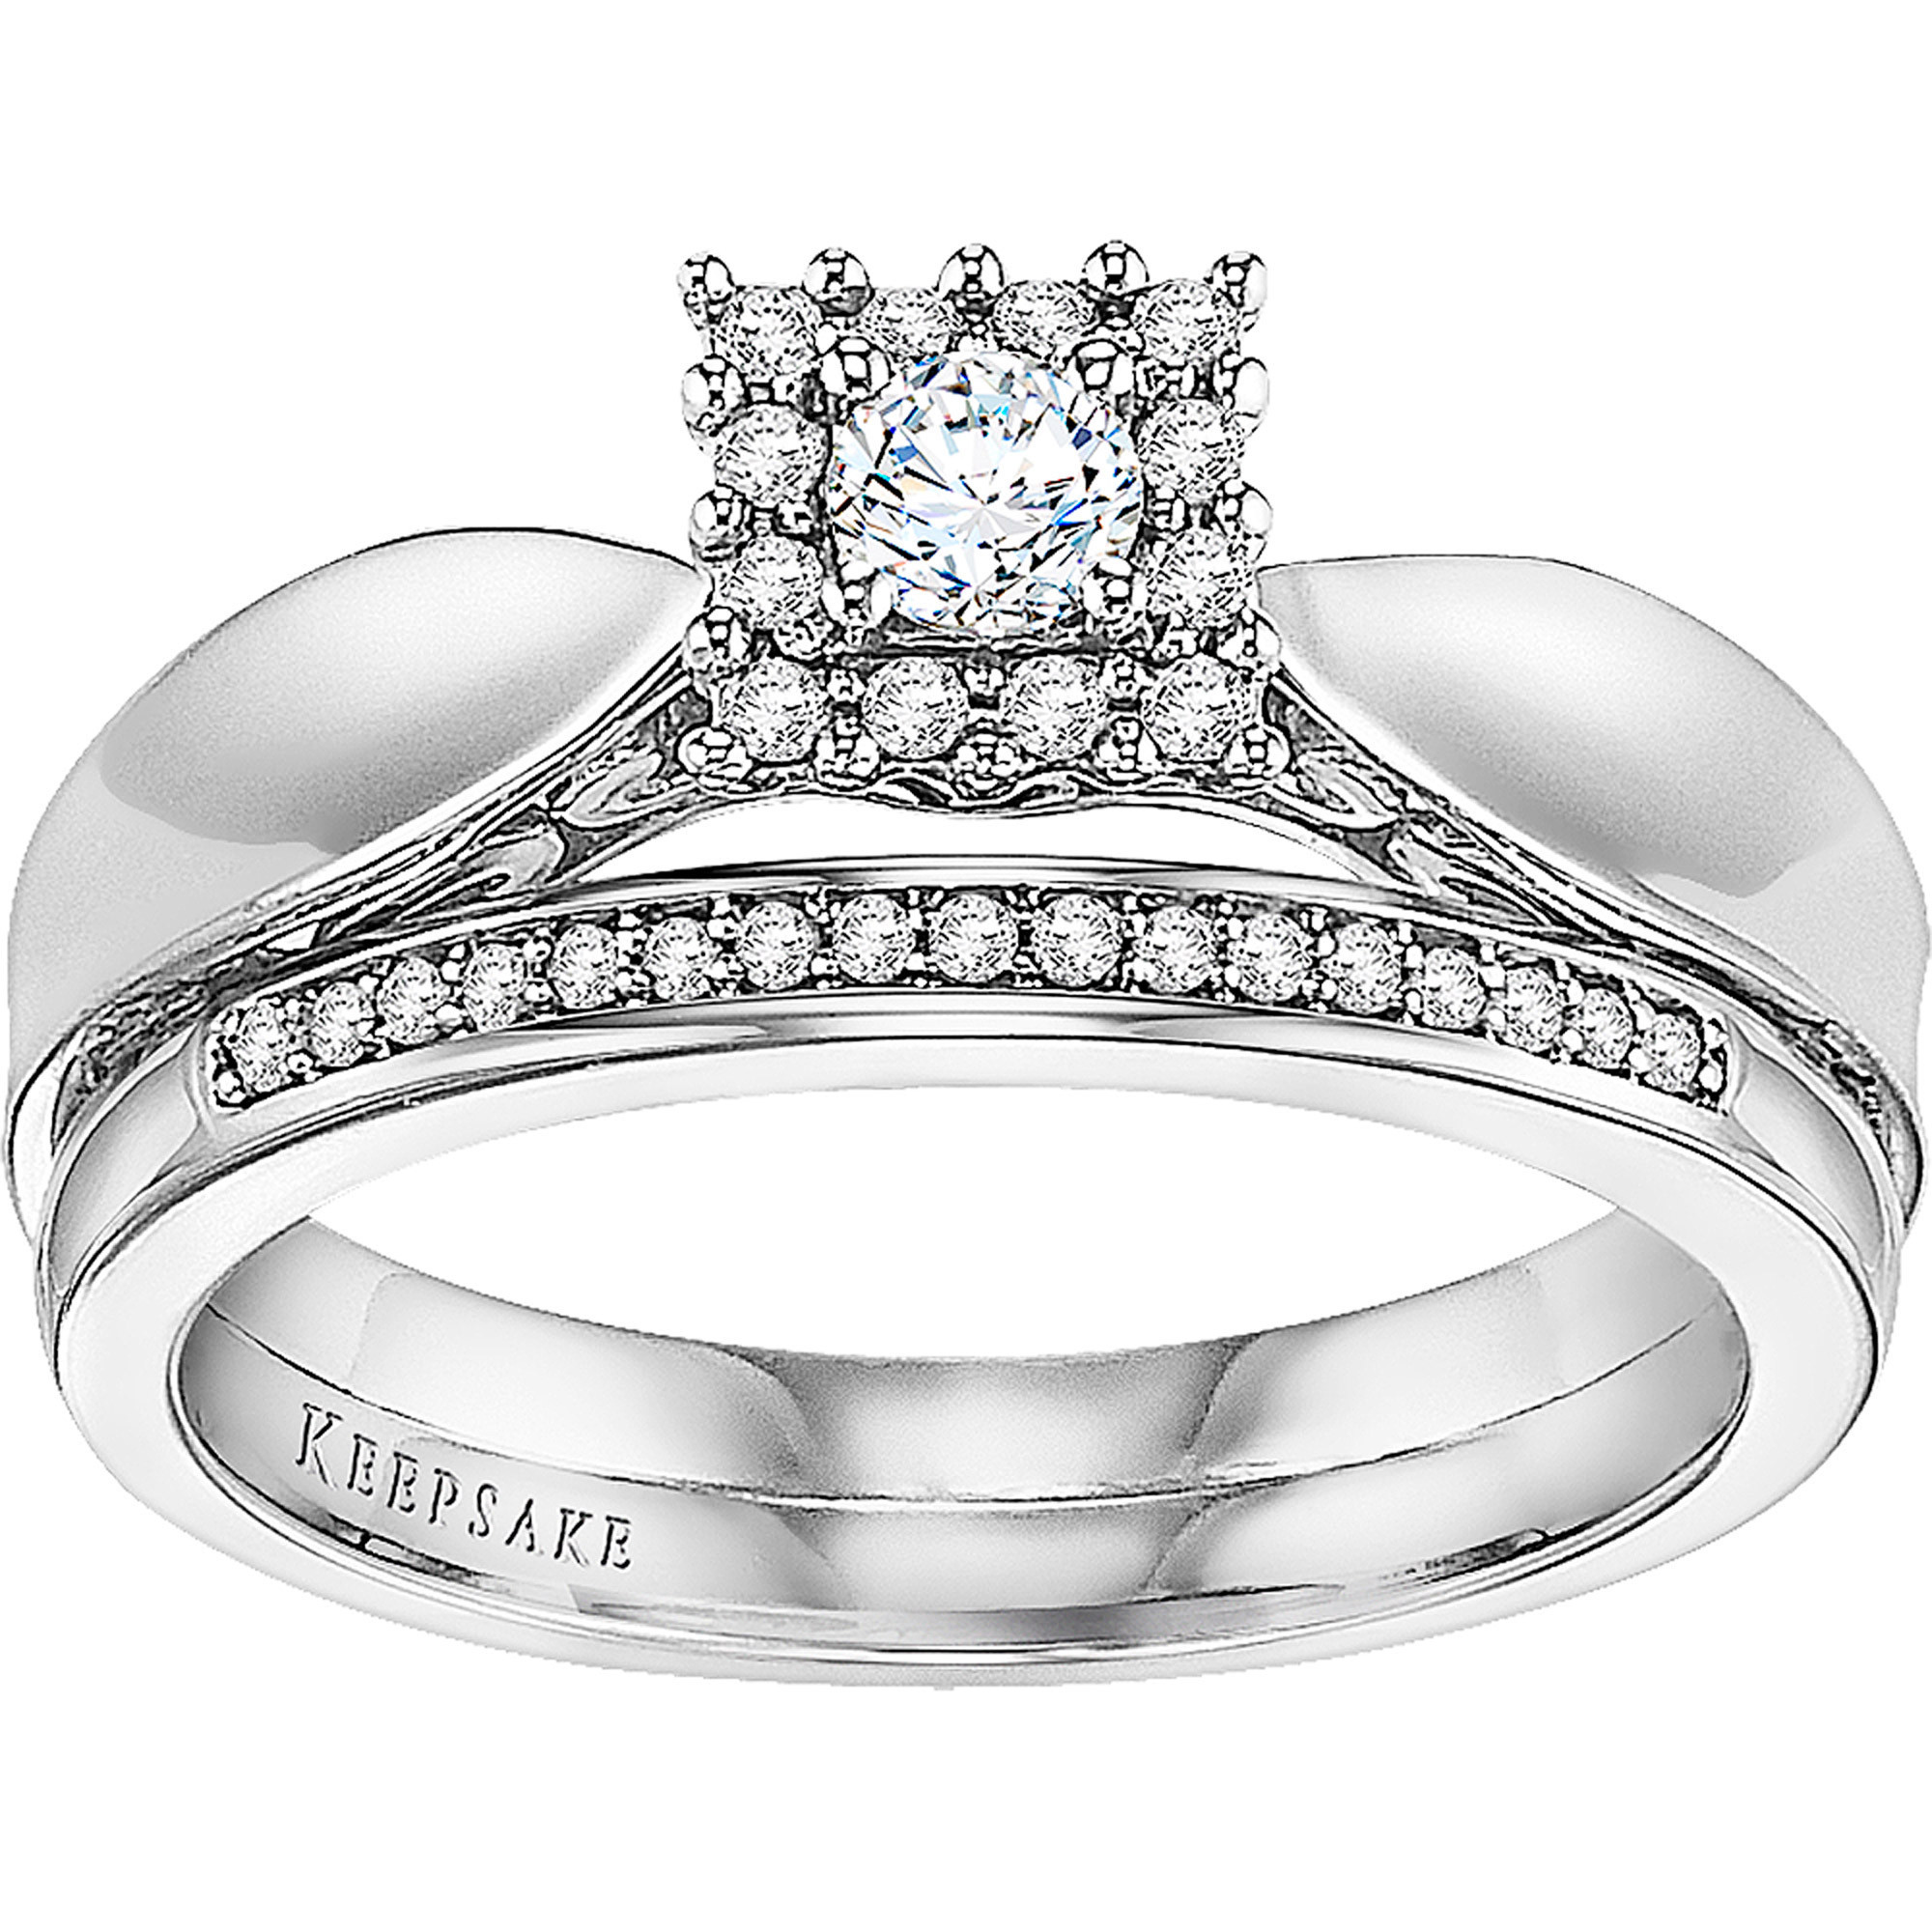 Walmart Wedding Rings Sets For Him And Her
 Walmart Wedding Ring Sets His And Hers Walmart Wedding